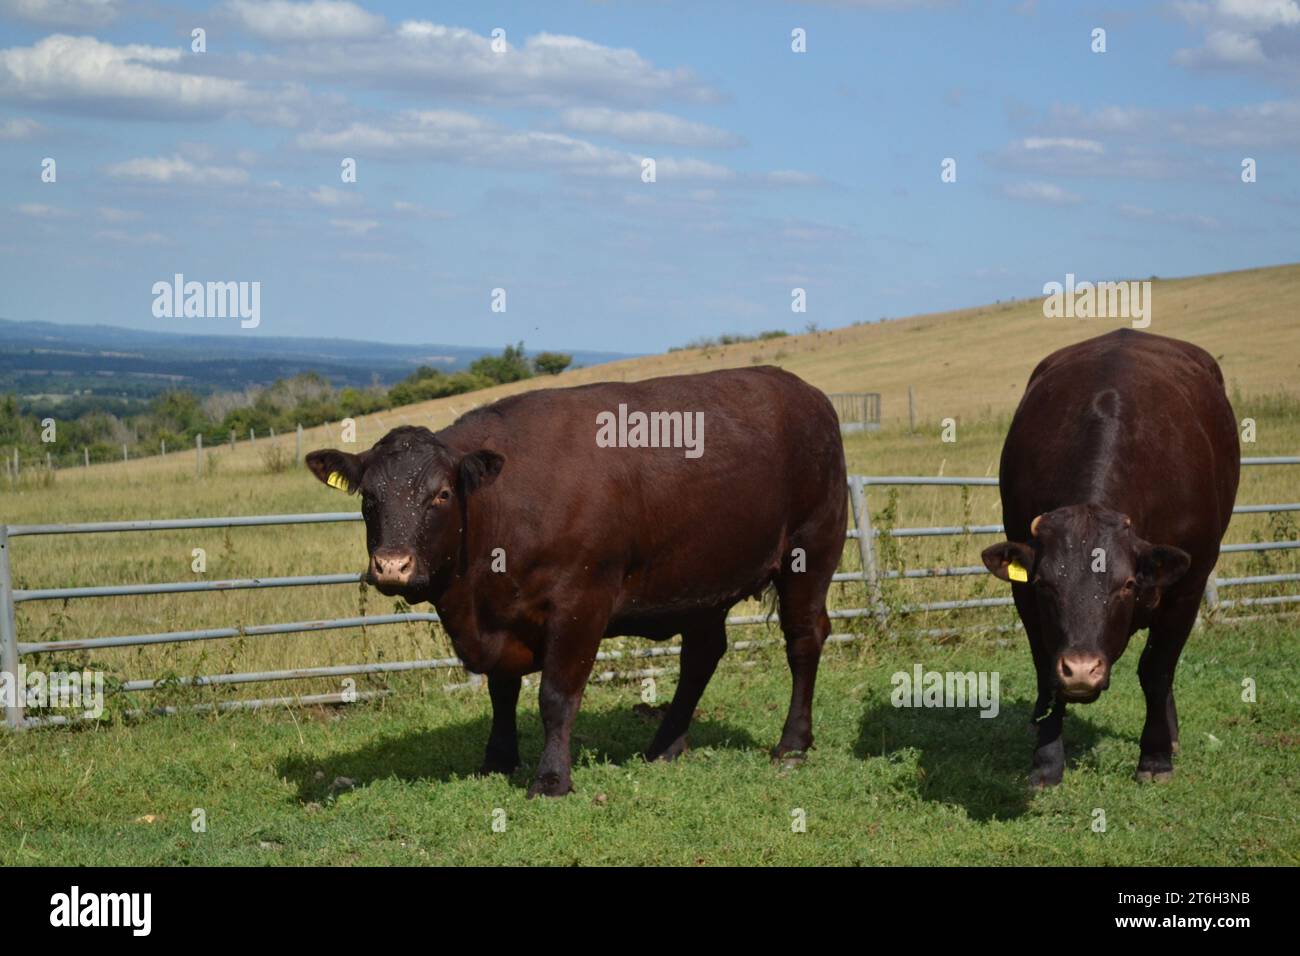 Mooo - Farm Cows on A Sunny Day with Blue Sky - Cattle in A Farmers Field - British Farm Animal - Sussex UK Stockfoto